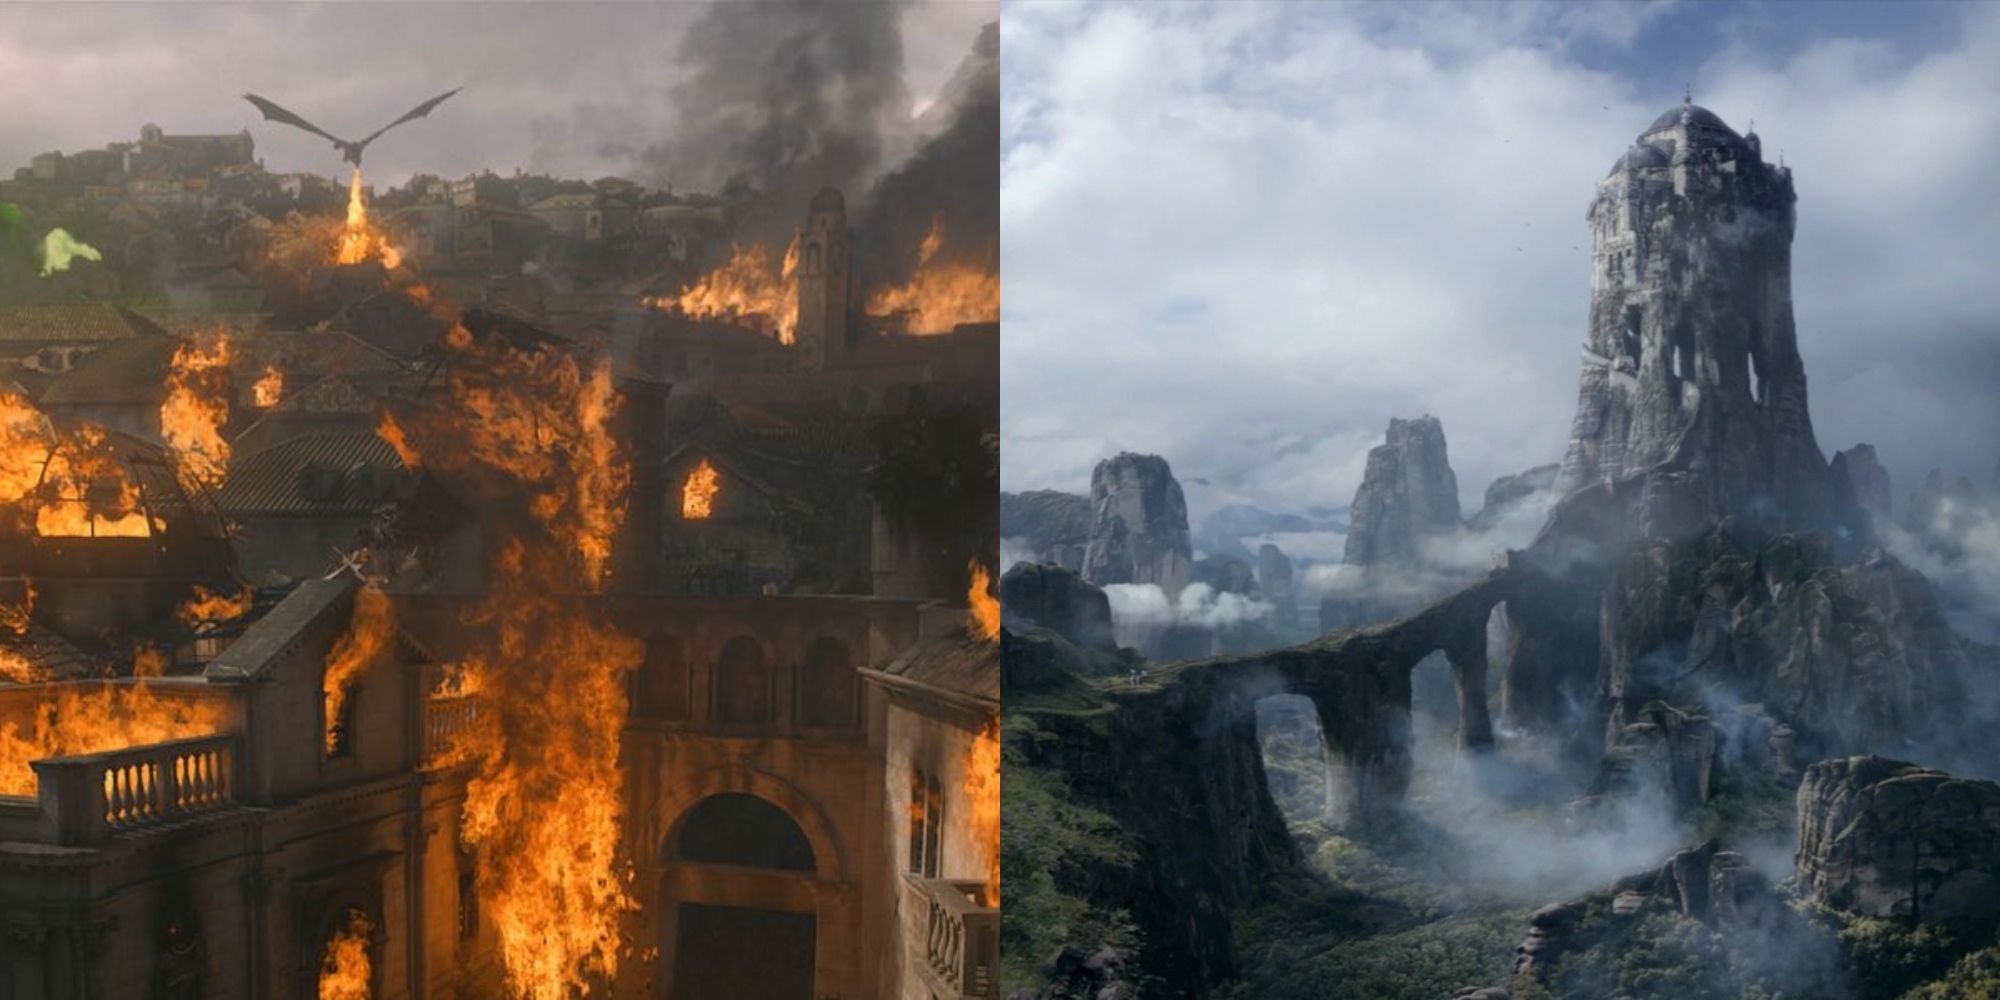 Westeros in Game of Thrones